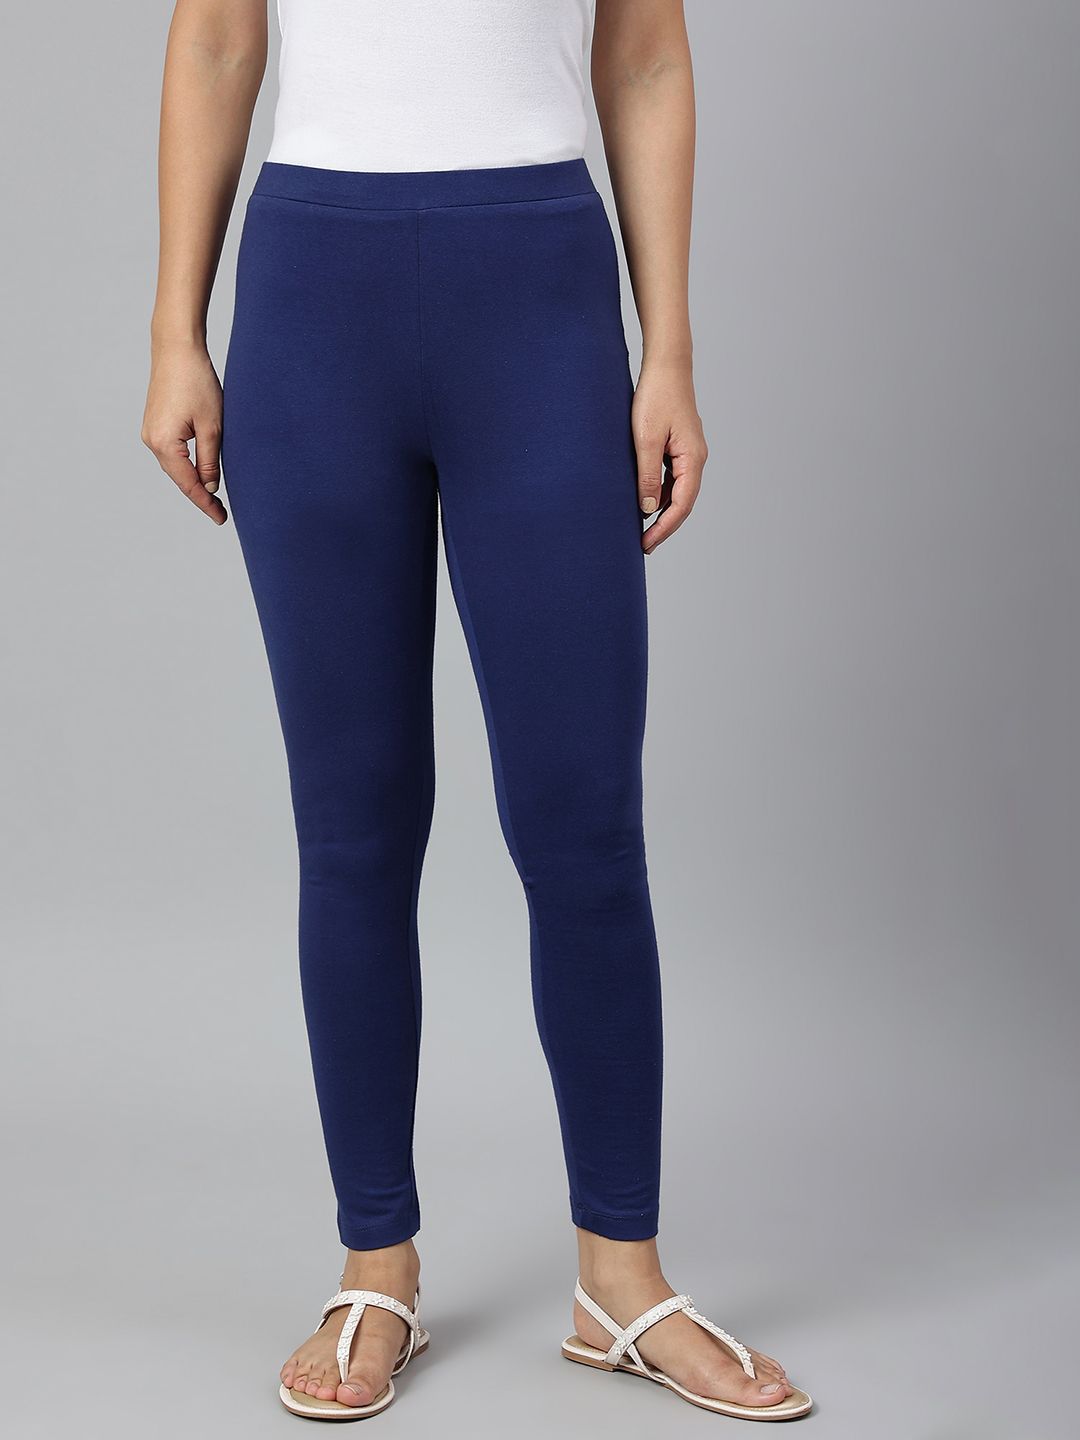 W Women Blue Solid Ankle Length Leggings Price in India